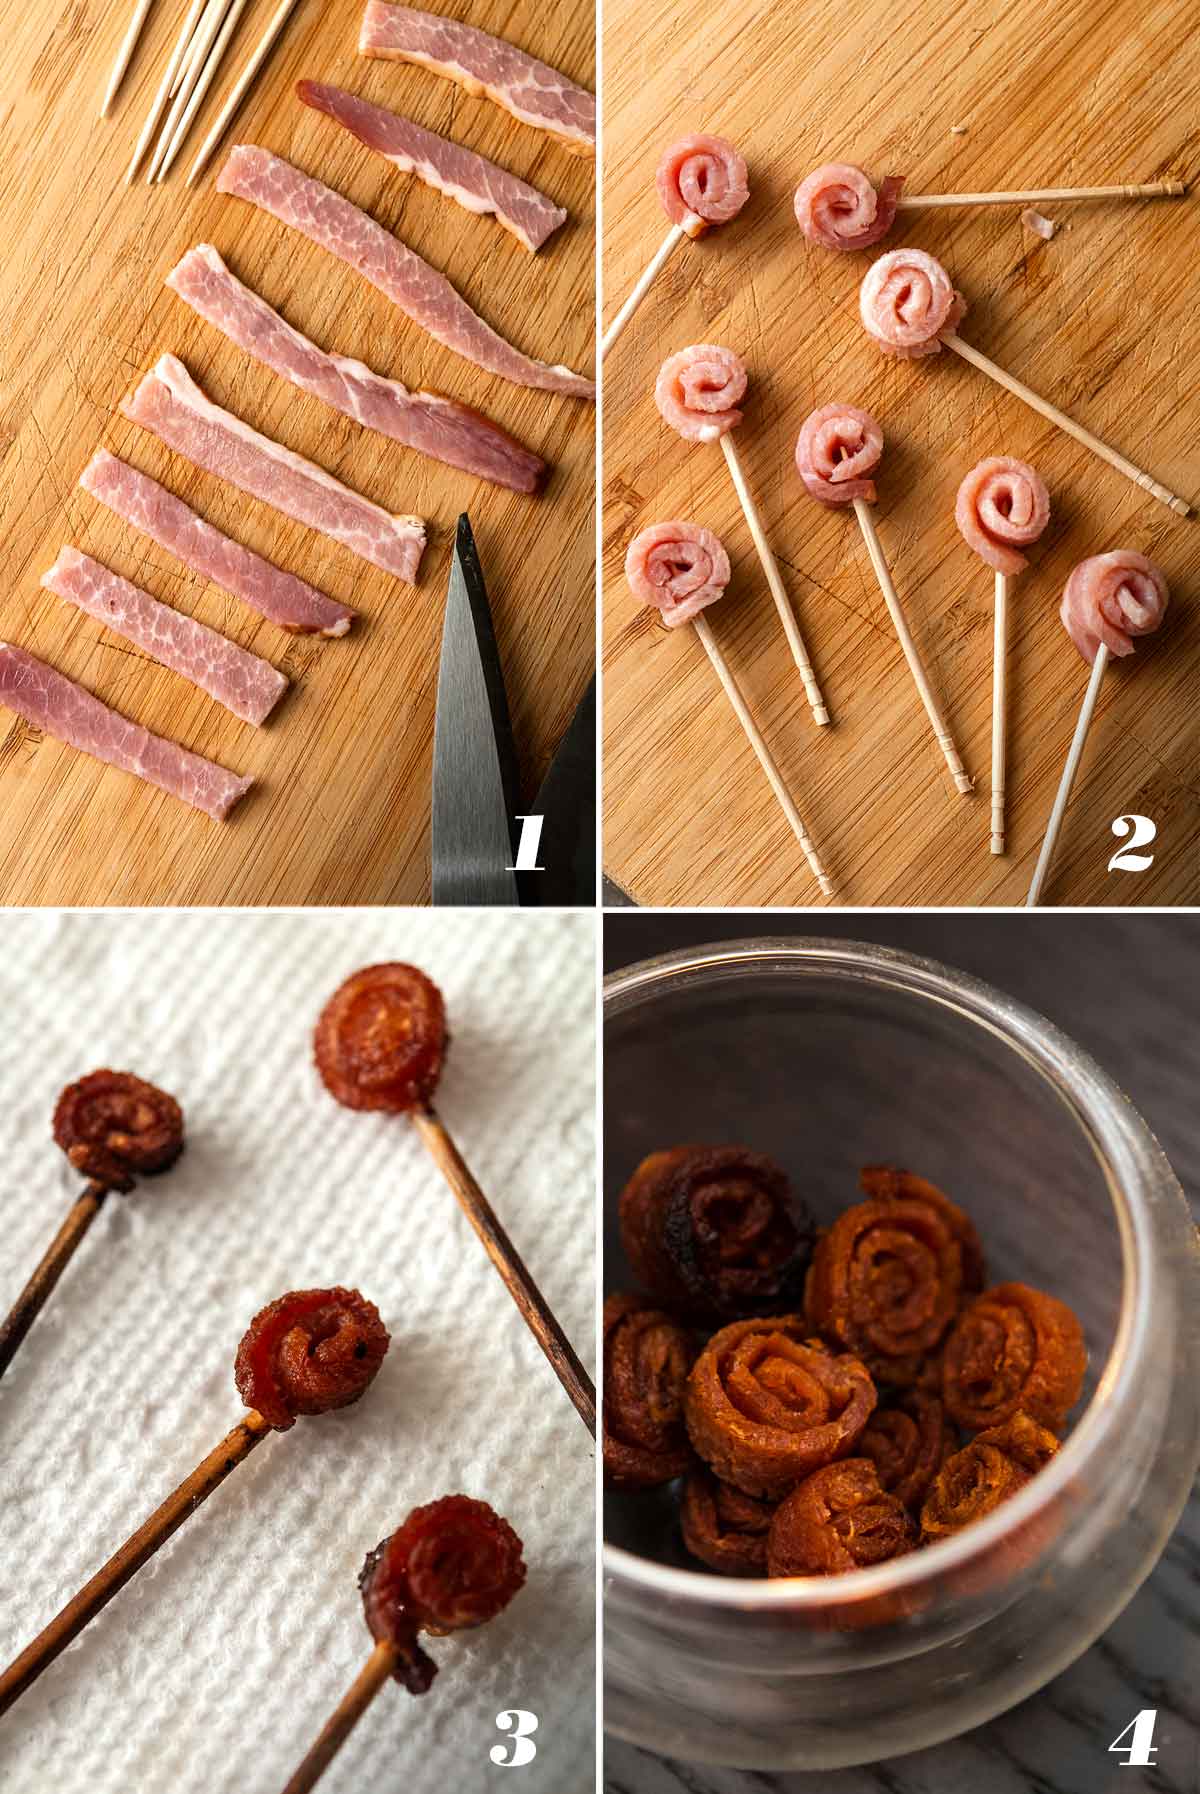 A collage of 4 numbered images showing how to make small bacon roses.